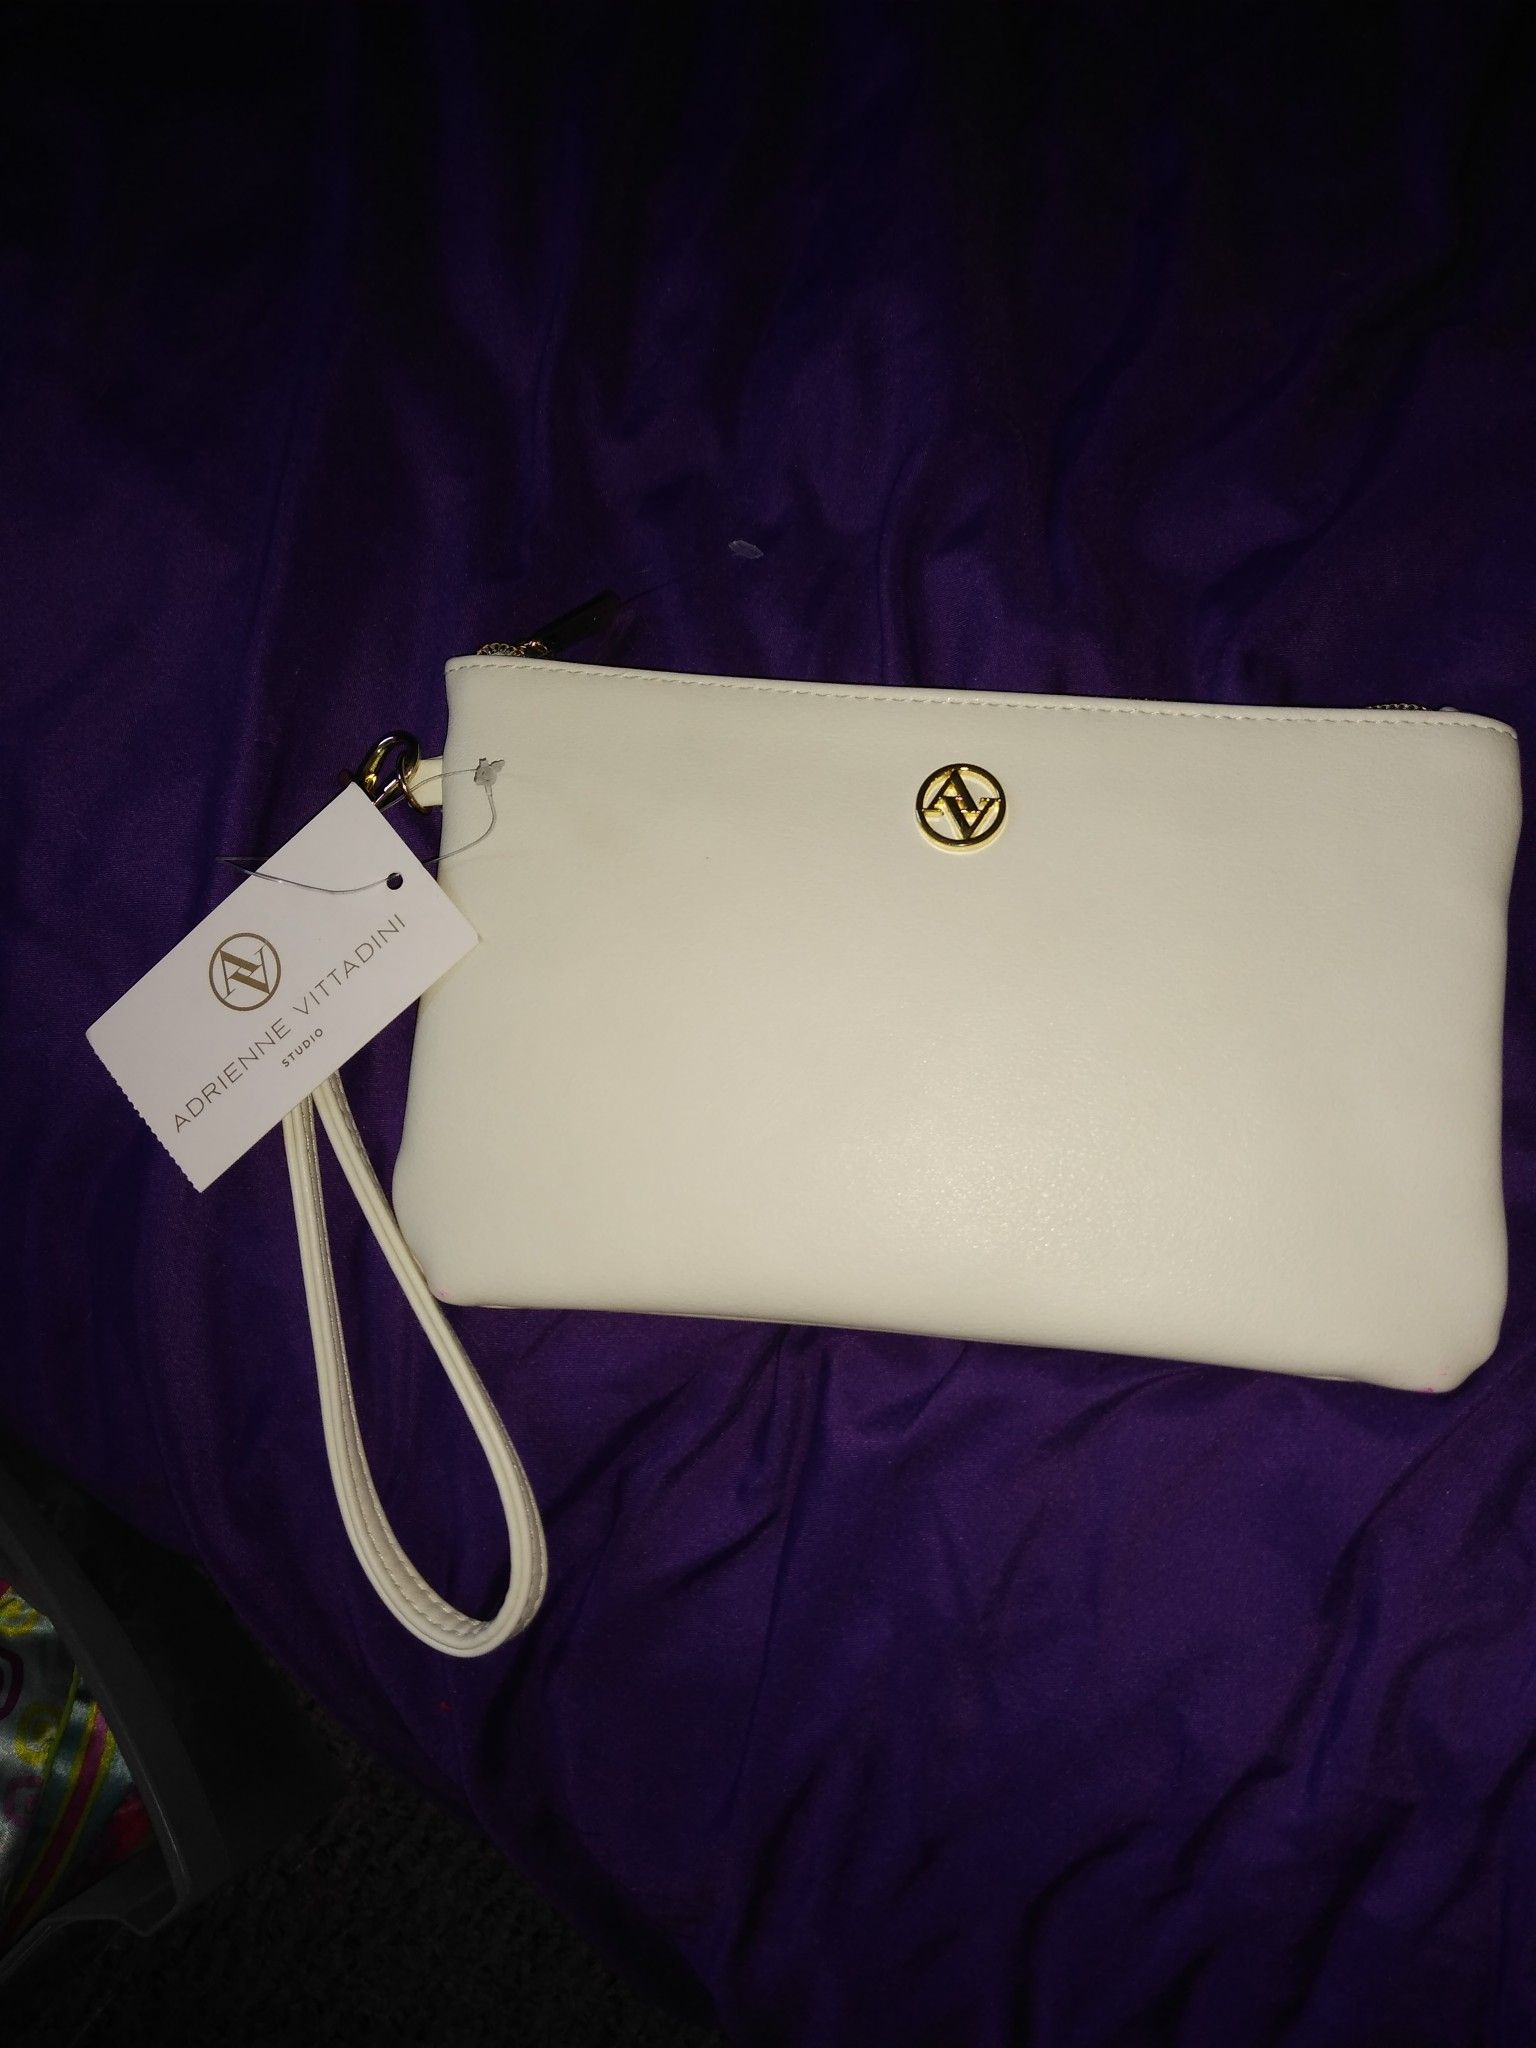 Nwt. ADRIENNE VITTADINI Ivory Charging Zip Wallet Wristlet - iPhone, Android